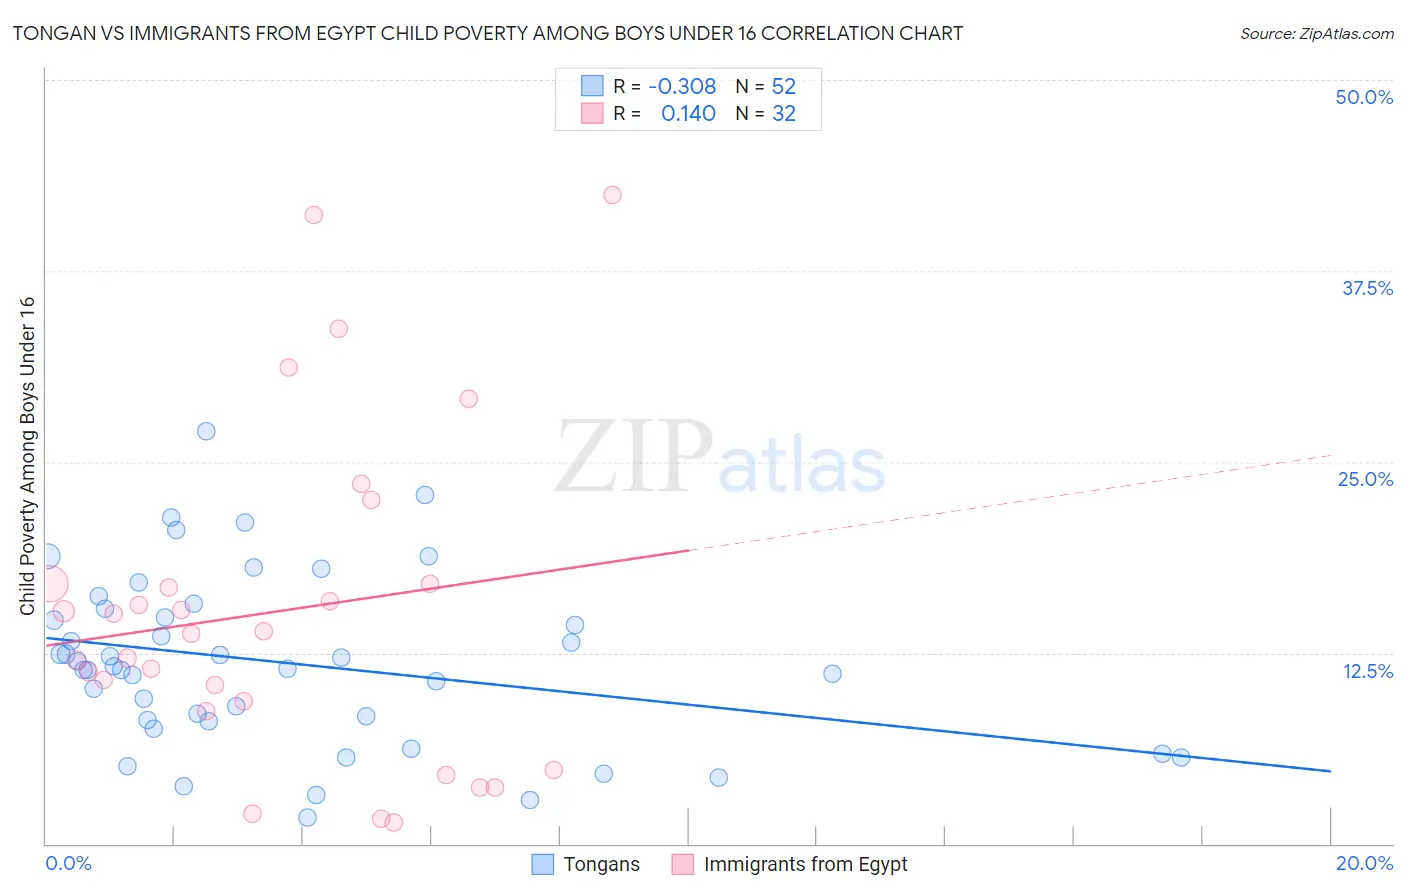 Tongan vs Immigrants from Egypt Child Poverty Among Boys Under 16